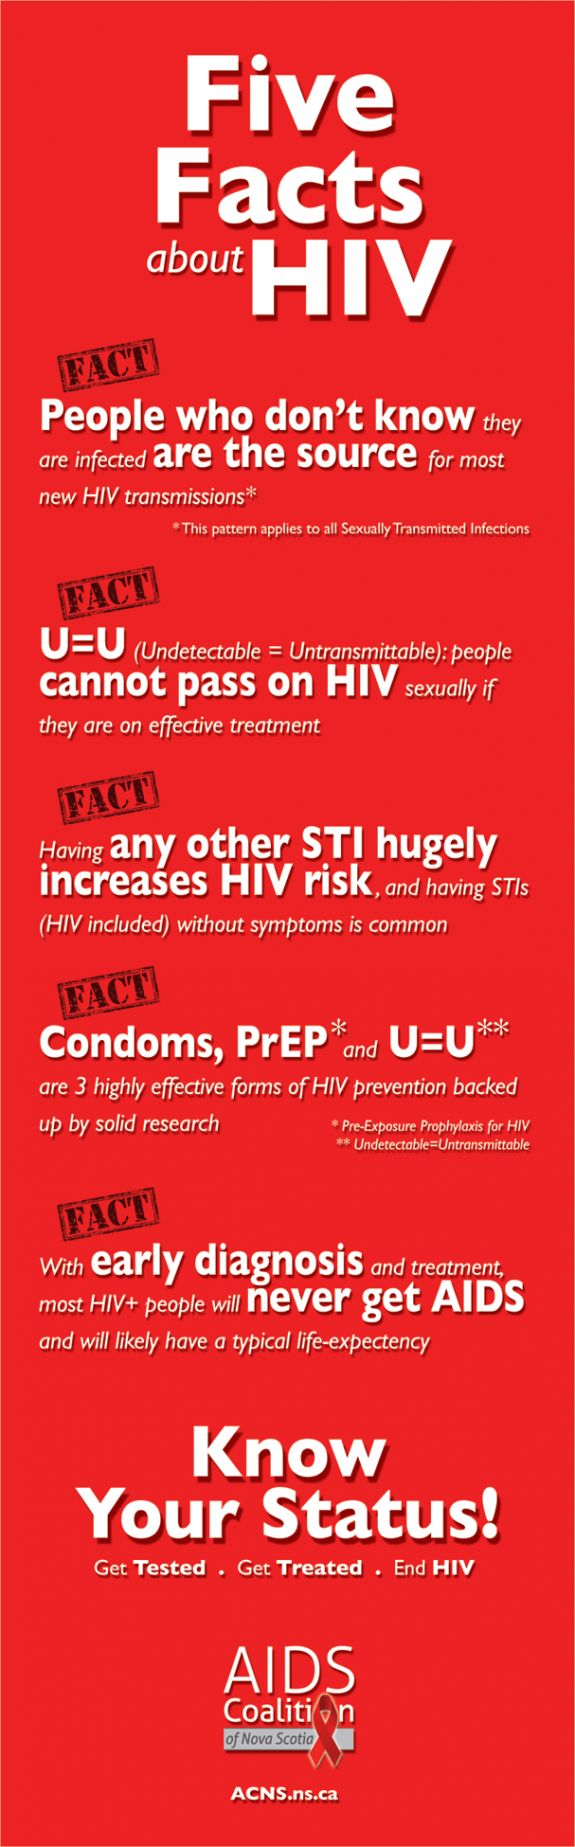 AIDS Awareness Campaign : Five Facts about HIV